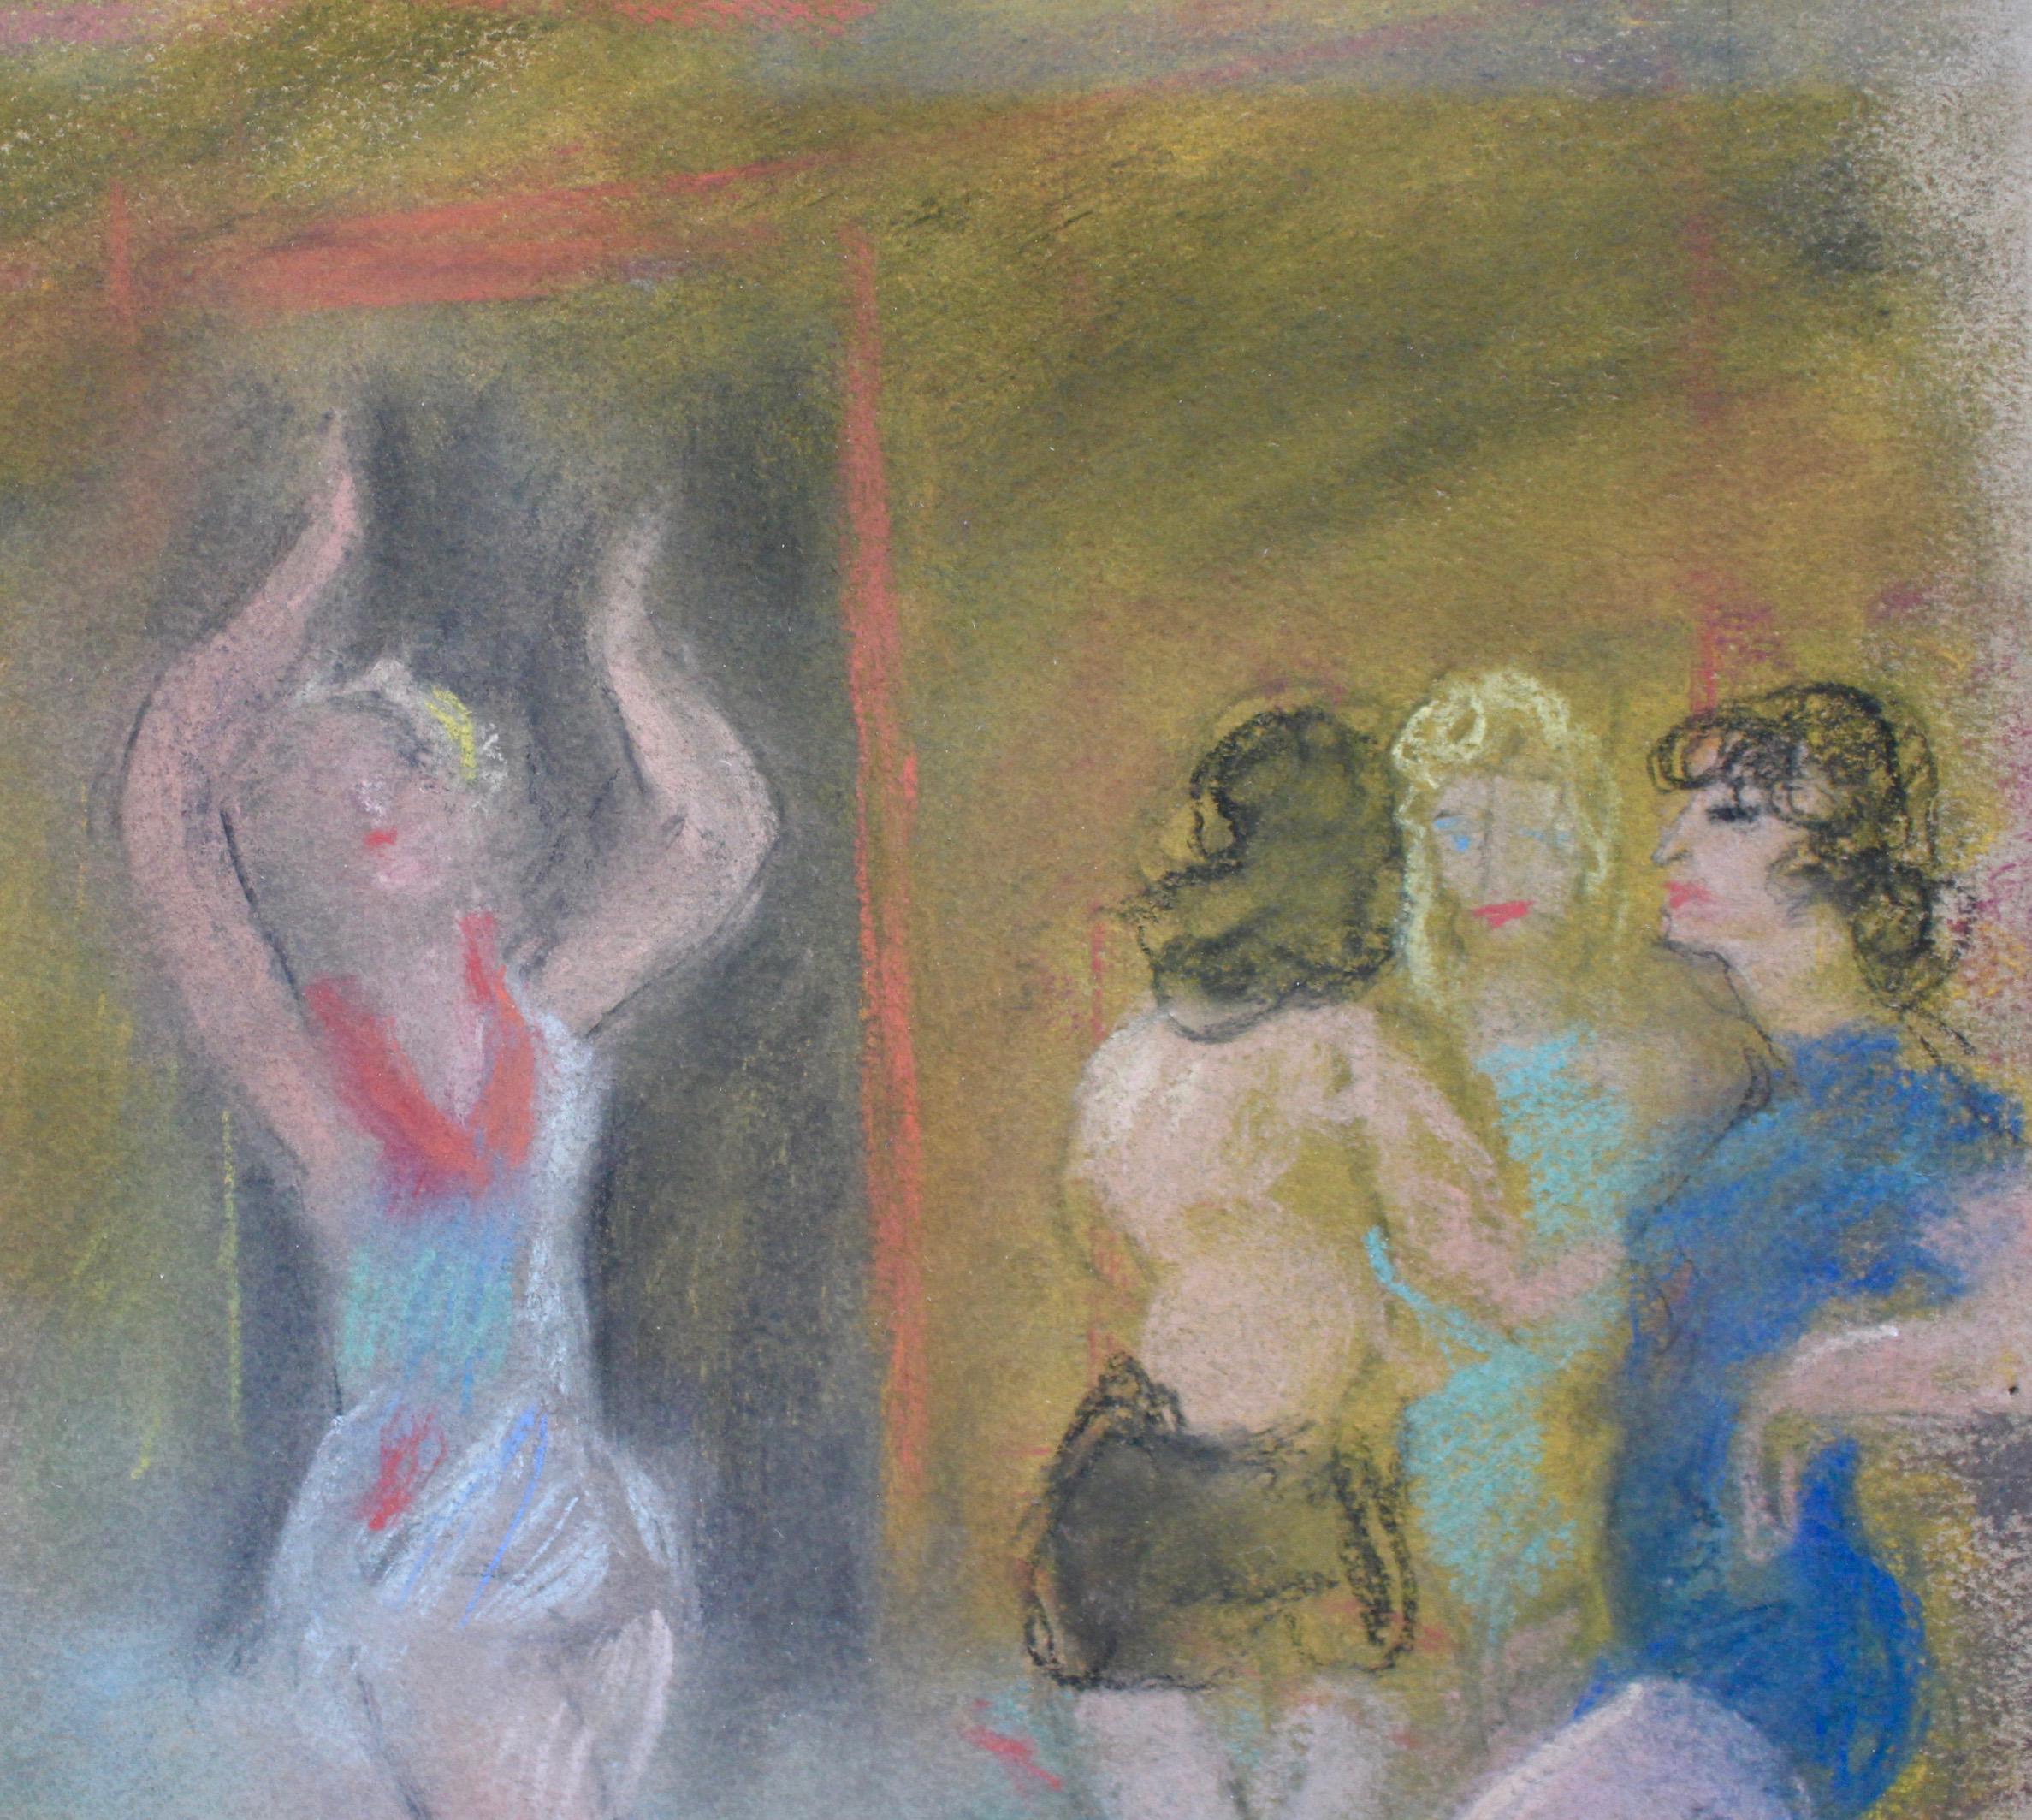 'The Cabaret Rehearsal', pastel on art paper, by Charles Camoin (circa 1920s - 1930s). Charles Camoin was known for his paintings of the cabaret scene and this work of art captures a glimpse in time from early 20th Century France. In this depiction,